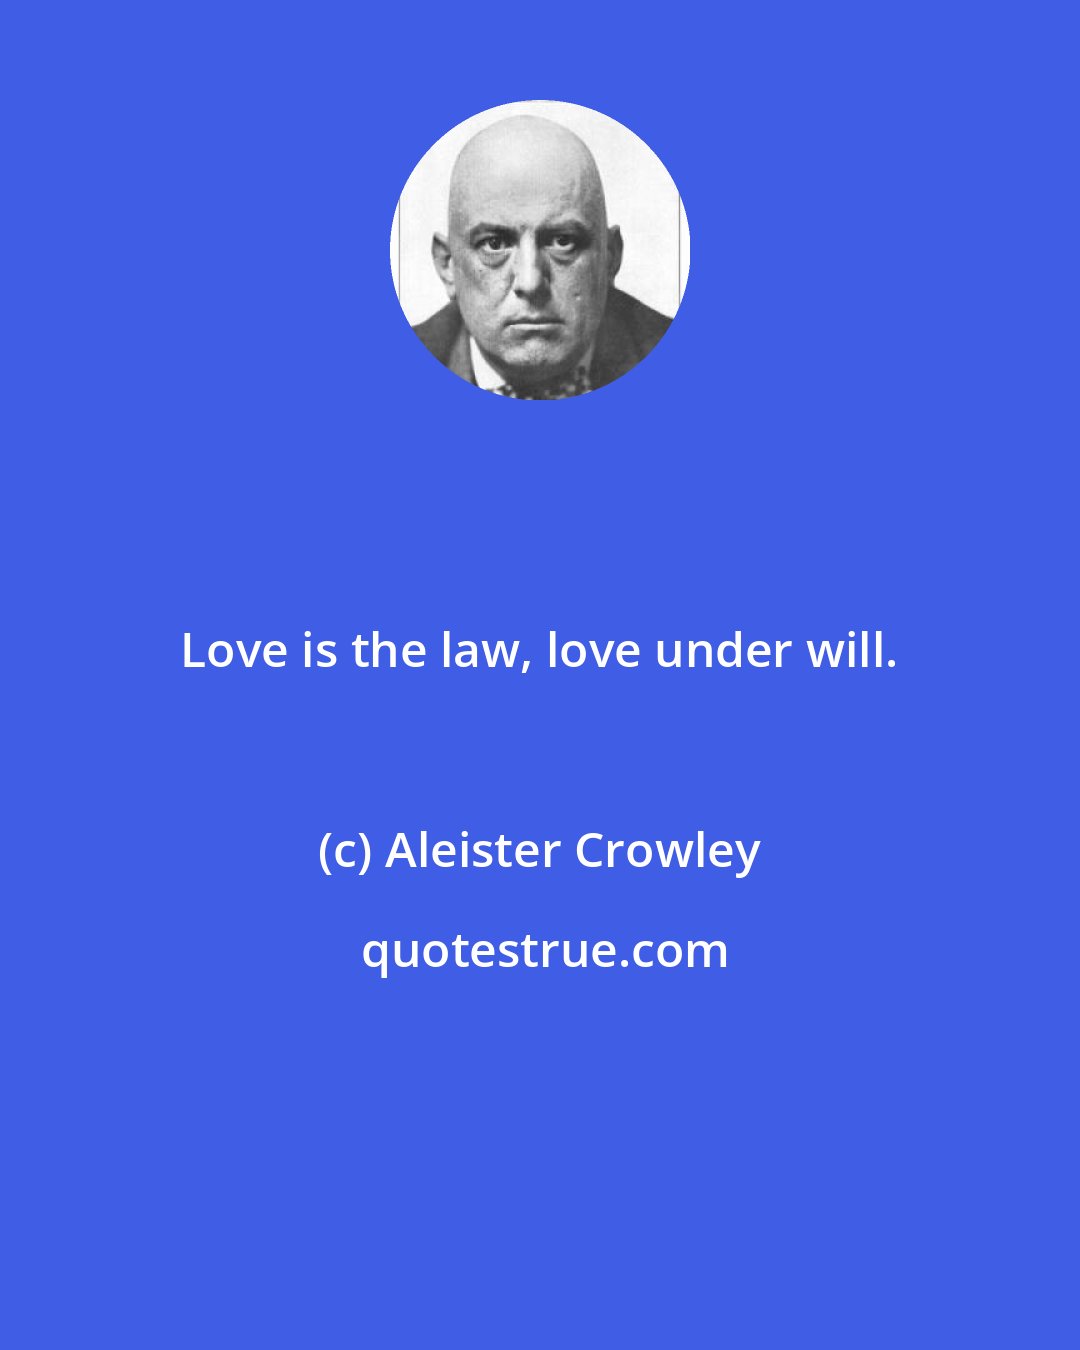 Aleister Crowley: Love is the law, love under will.